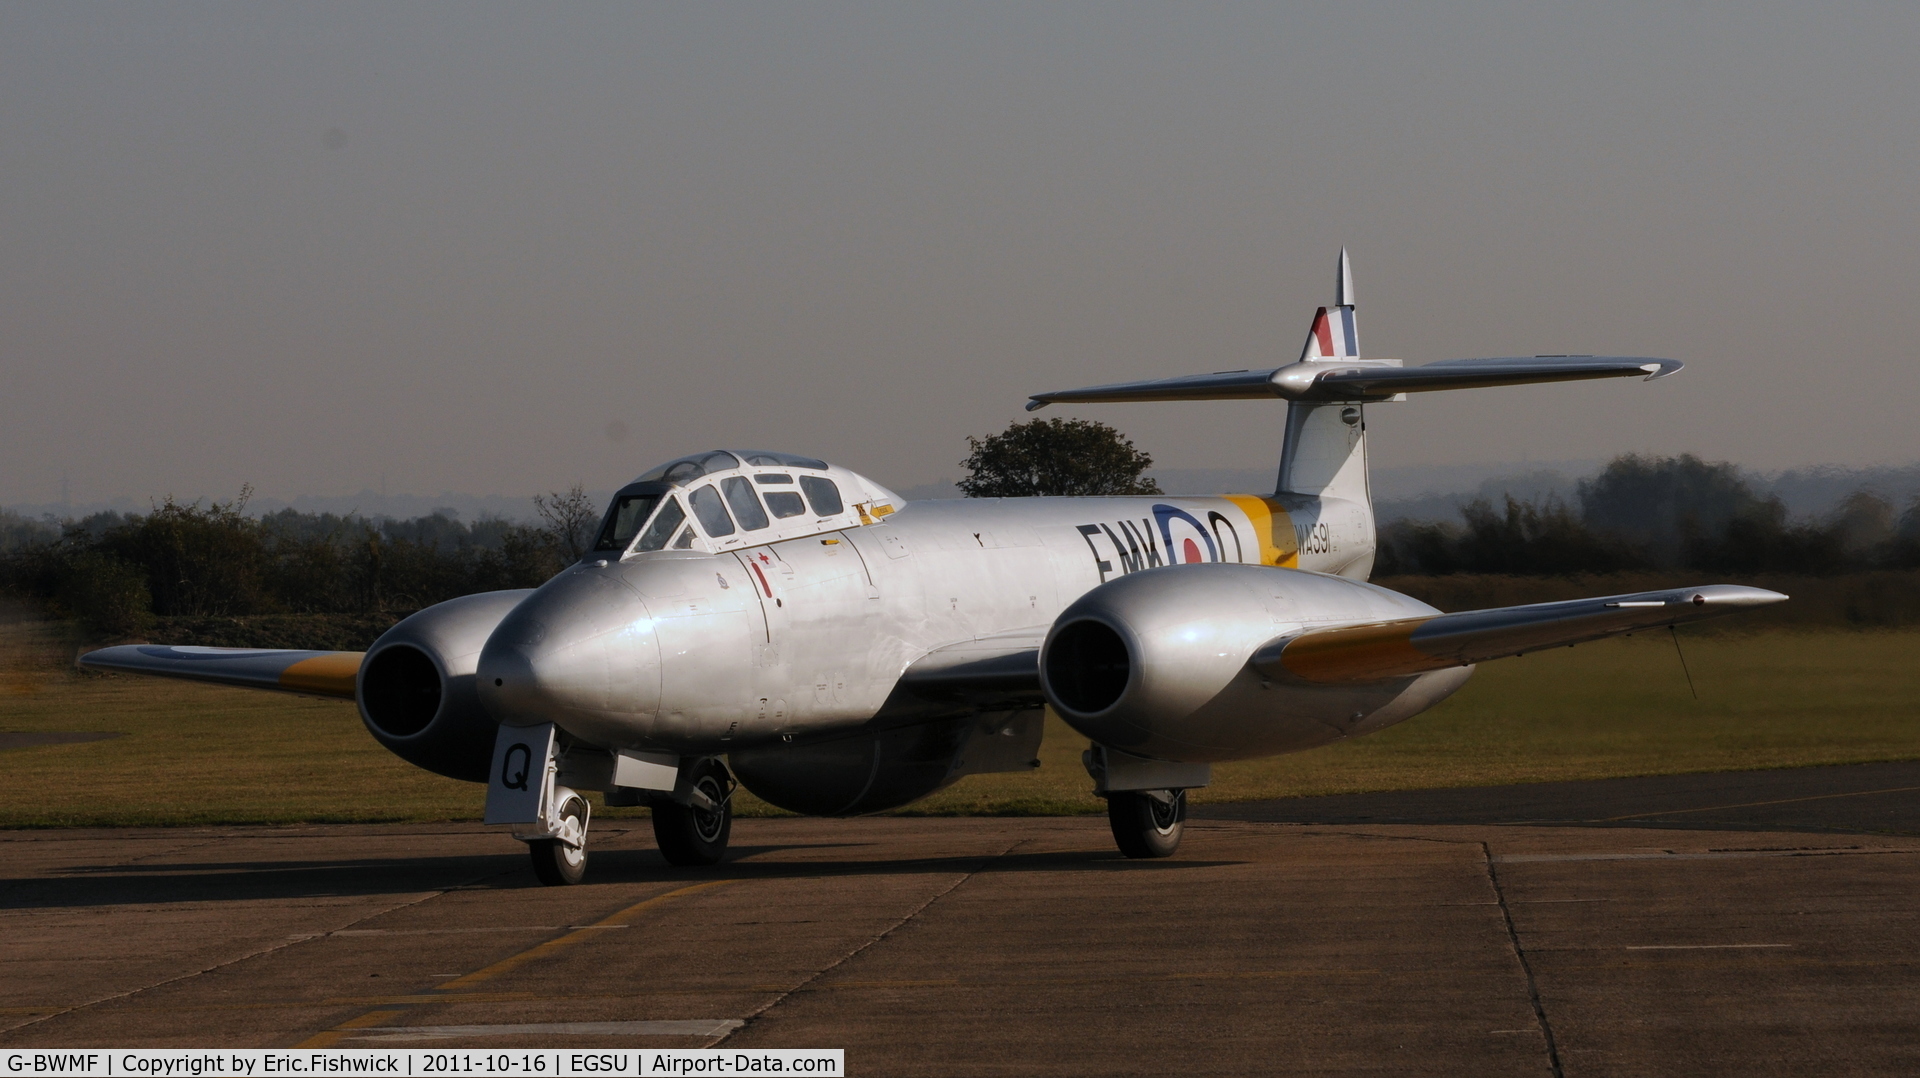 G-BWMF, 1949 Gloster Meteor T.7 C/N G5/356460, 3. WA591 - making its first Public flying display appearance at Duxford's Autumn Air Show, October 2011